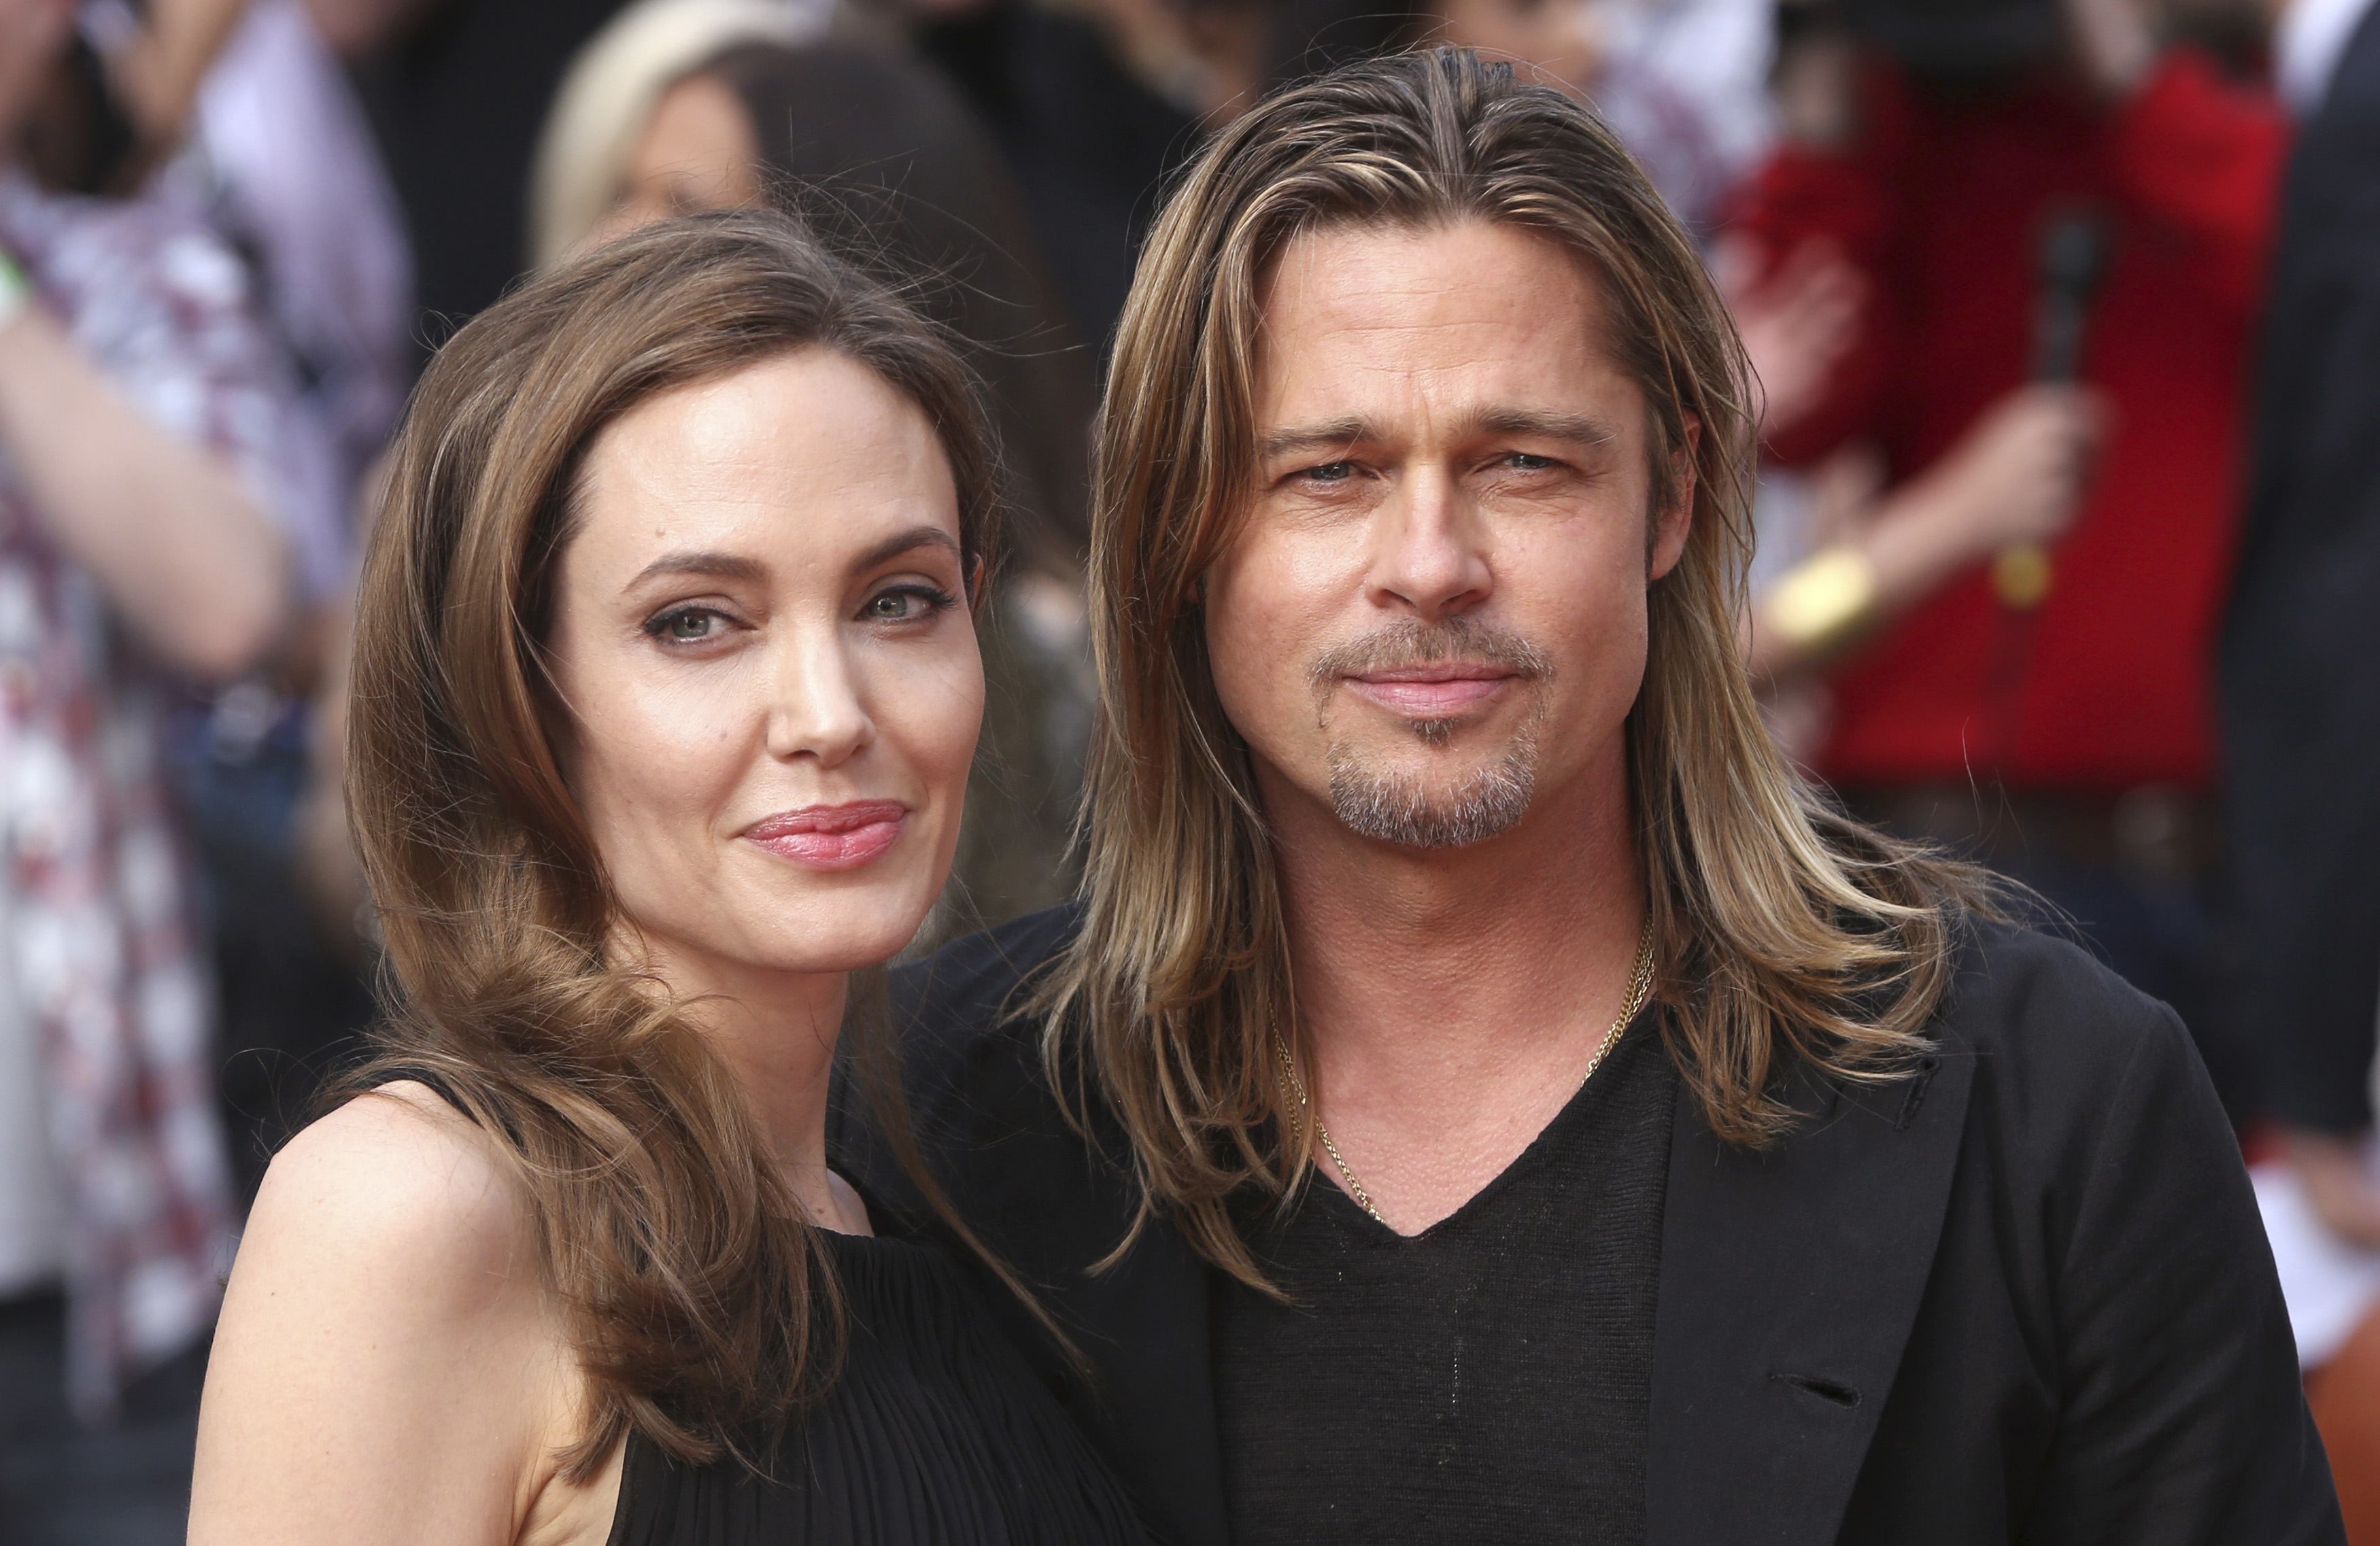 Jolie 'moved' by public support following surgery